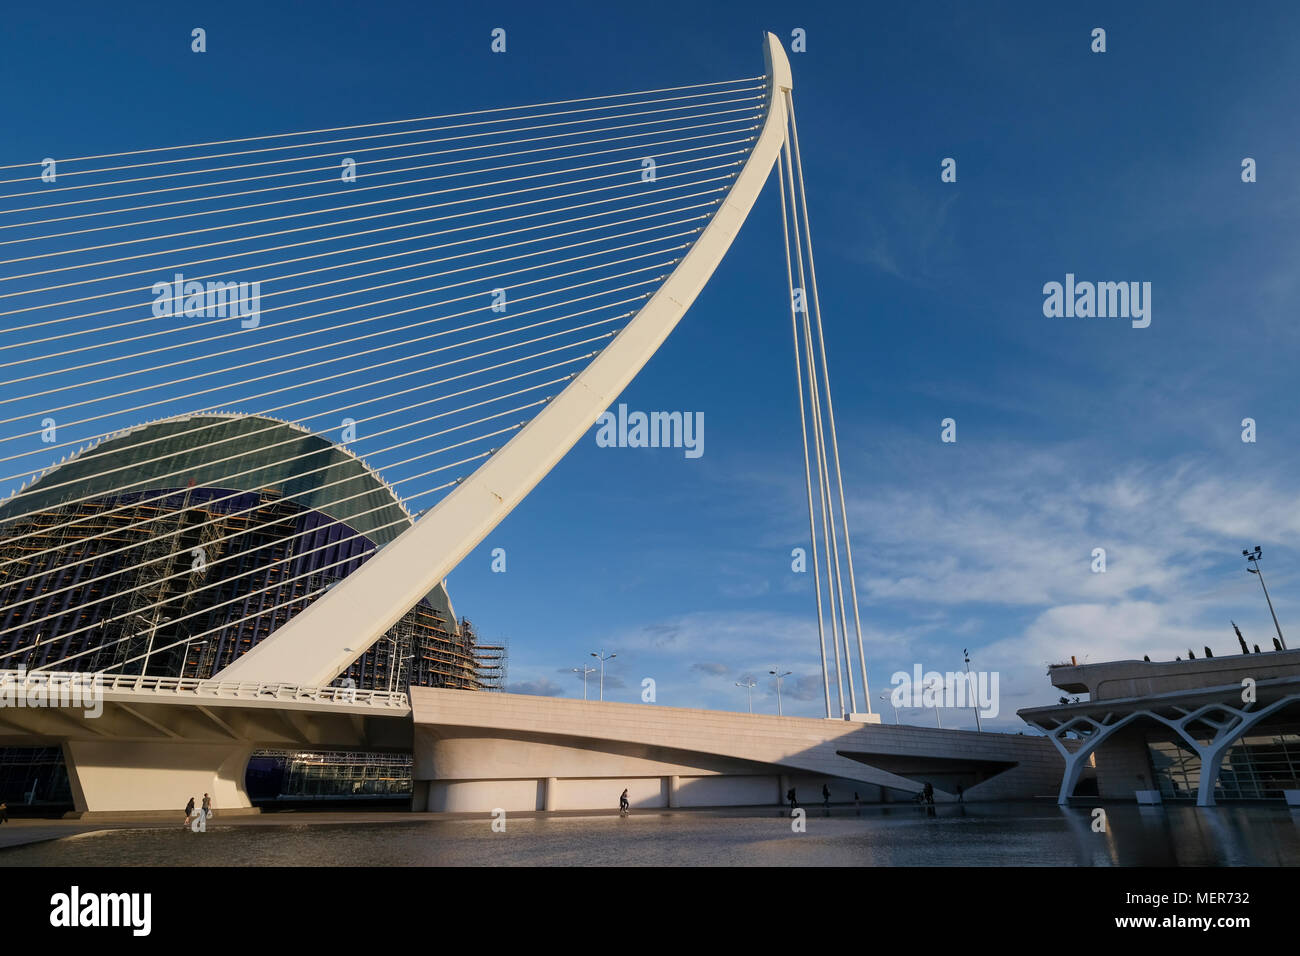 The Assut de l'Or Bridge, a feature of the city skyline and part of The City of Arts and Sciences in Valencia, Spain. Stock Photo